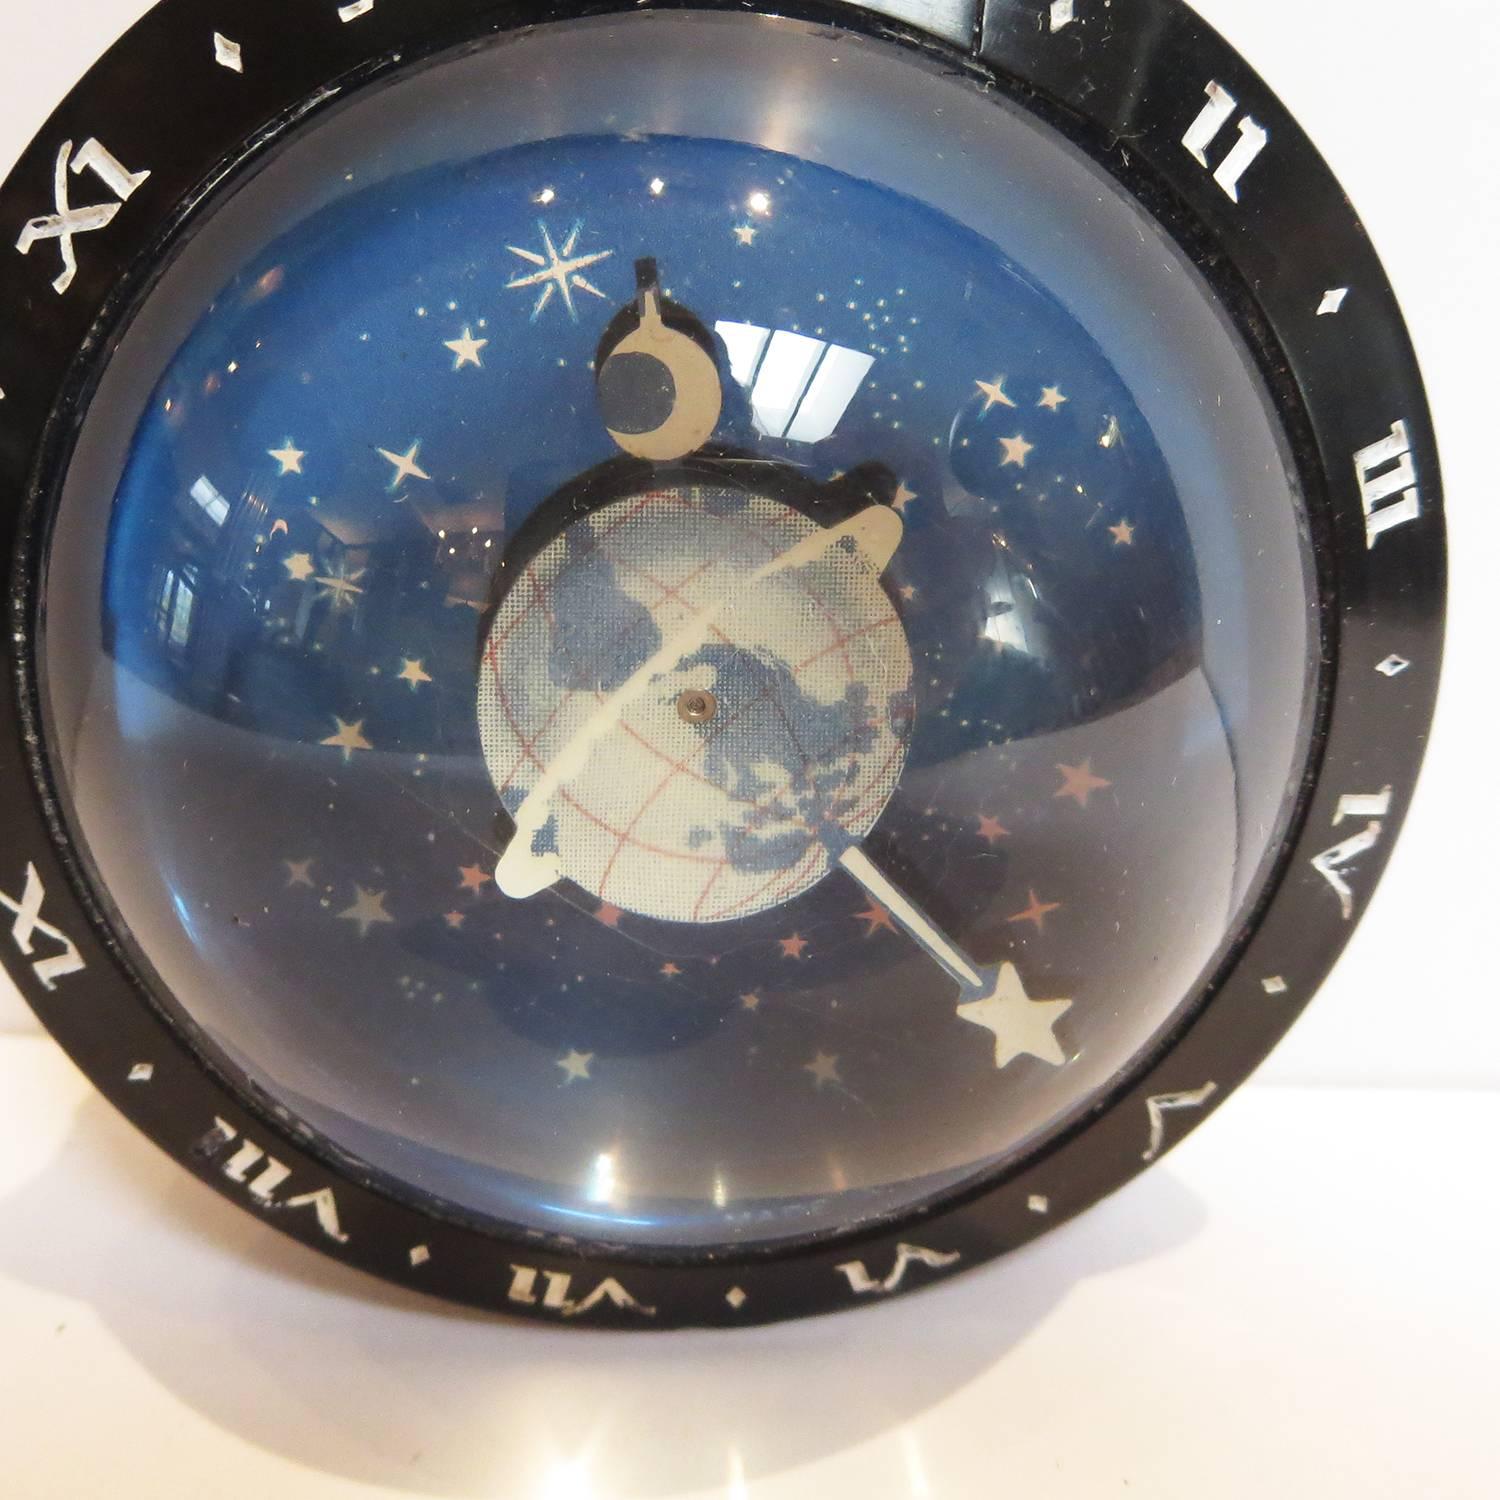 One of the most charming clocks made! This winding clock features a black bakelite case, and a thick glass dome. The world and star turn as a minute hand, white the crescent moon represents the hour hand. The clock face is a shimmering array of